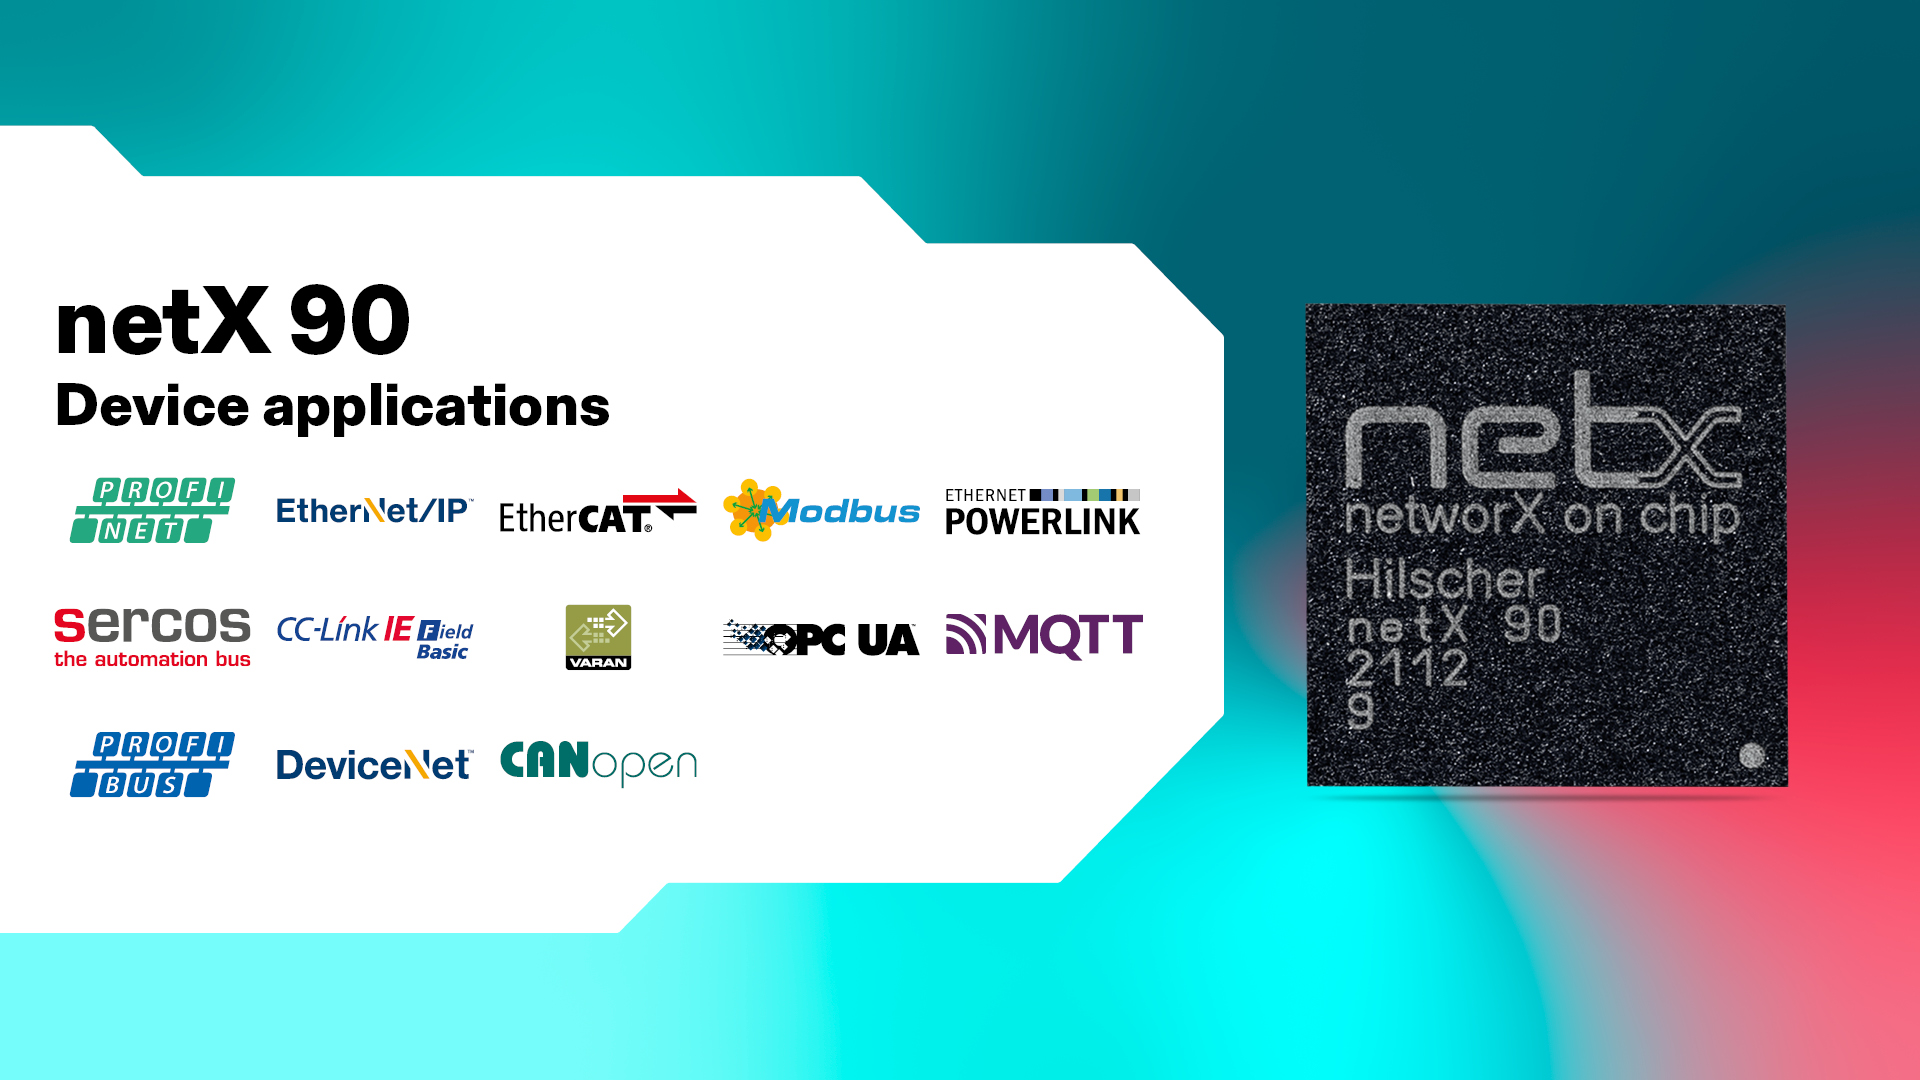 A netX 90 graphic in black on the right side on colorful background. Numerous protocol logos on a white background in an angular form on the left.